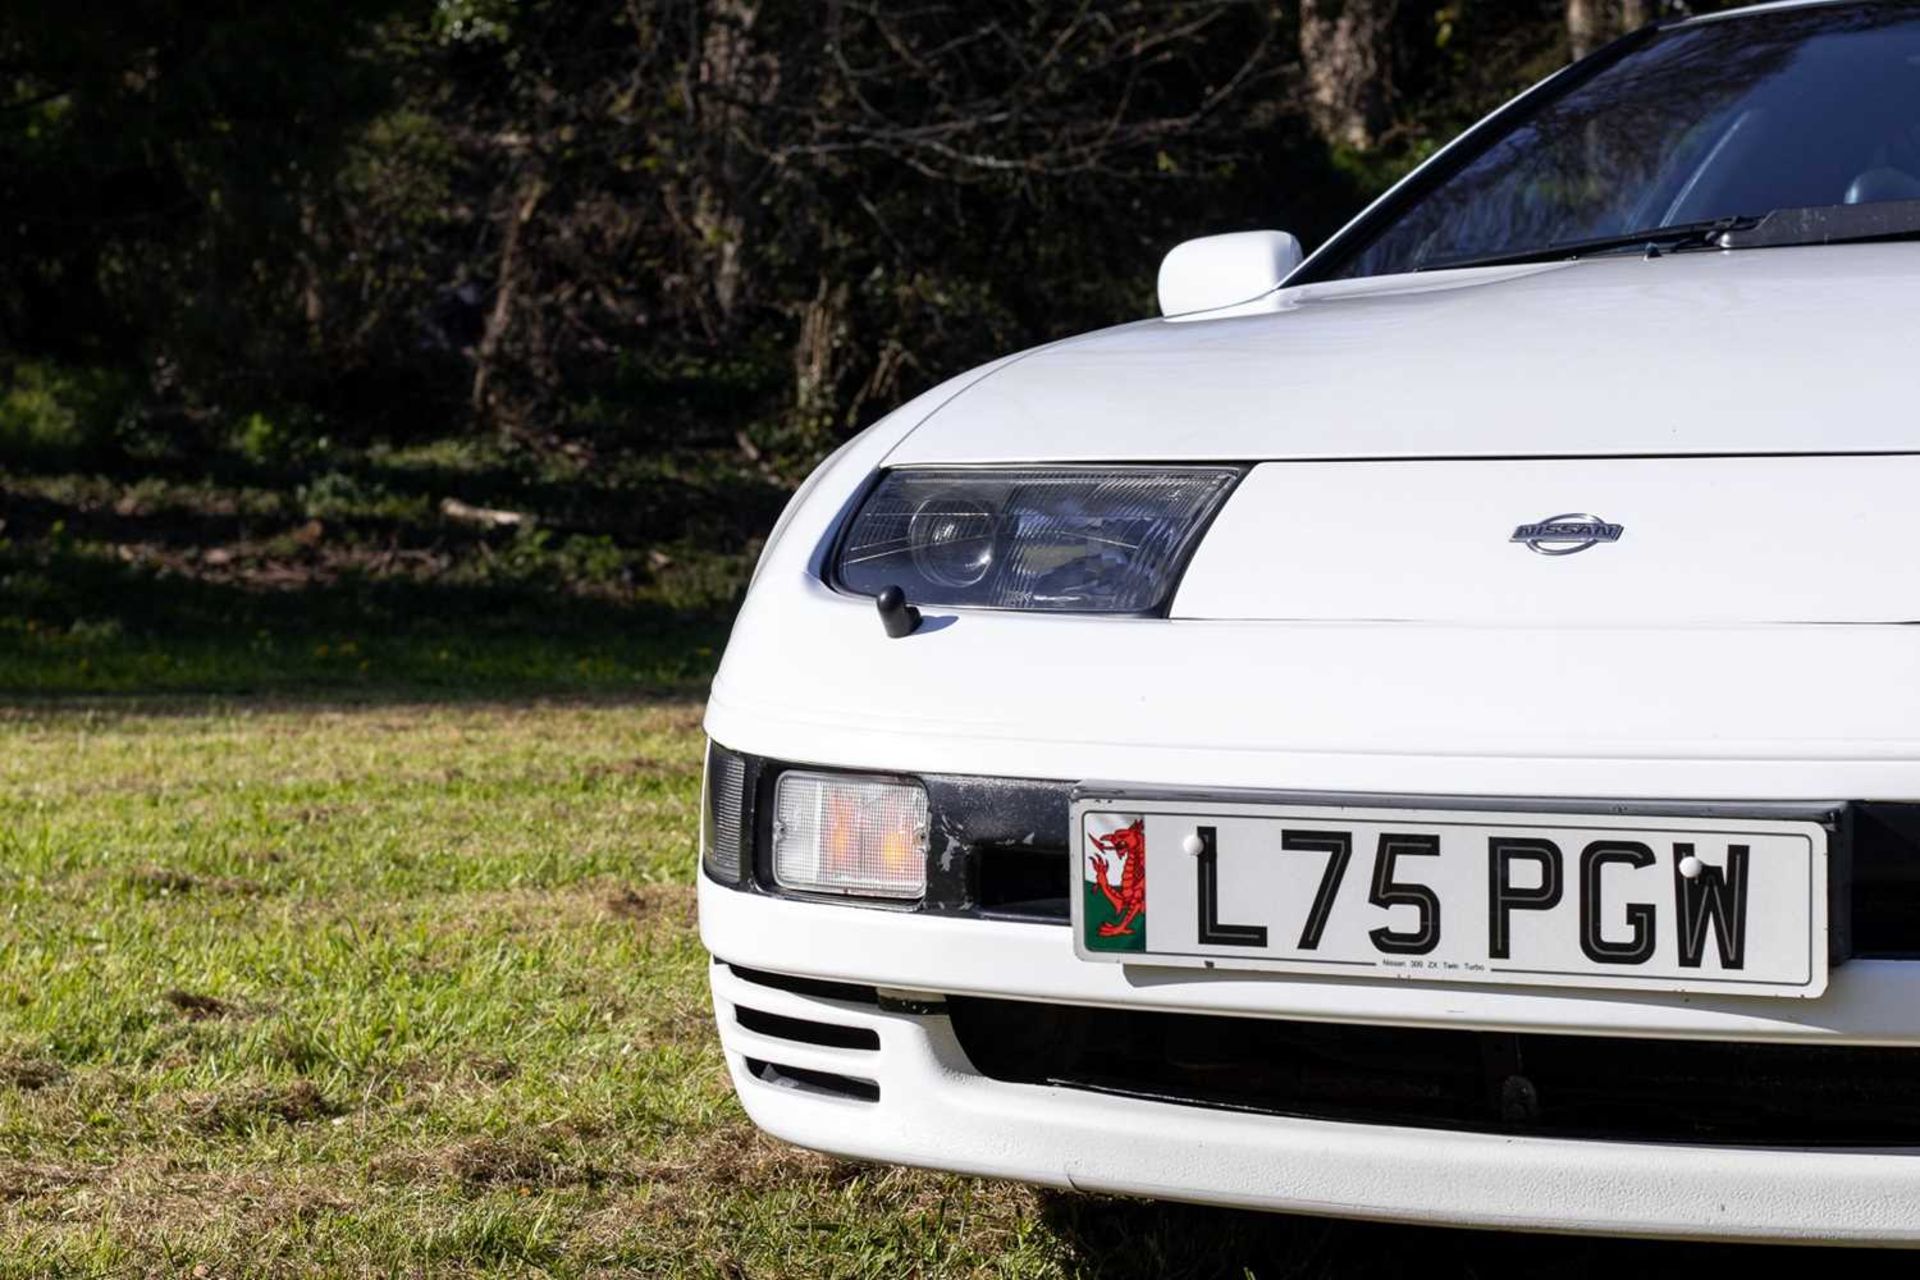 1990 Nissan 300ZX Turbo 2+2 Targa One of the last examples registered in the UK - Image 34 of 89